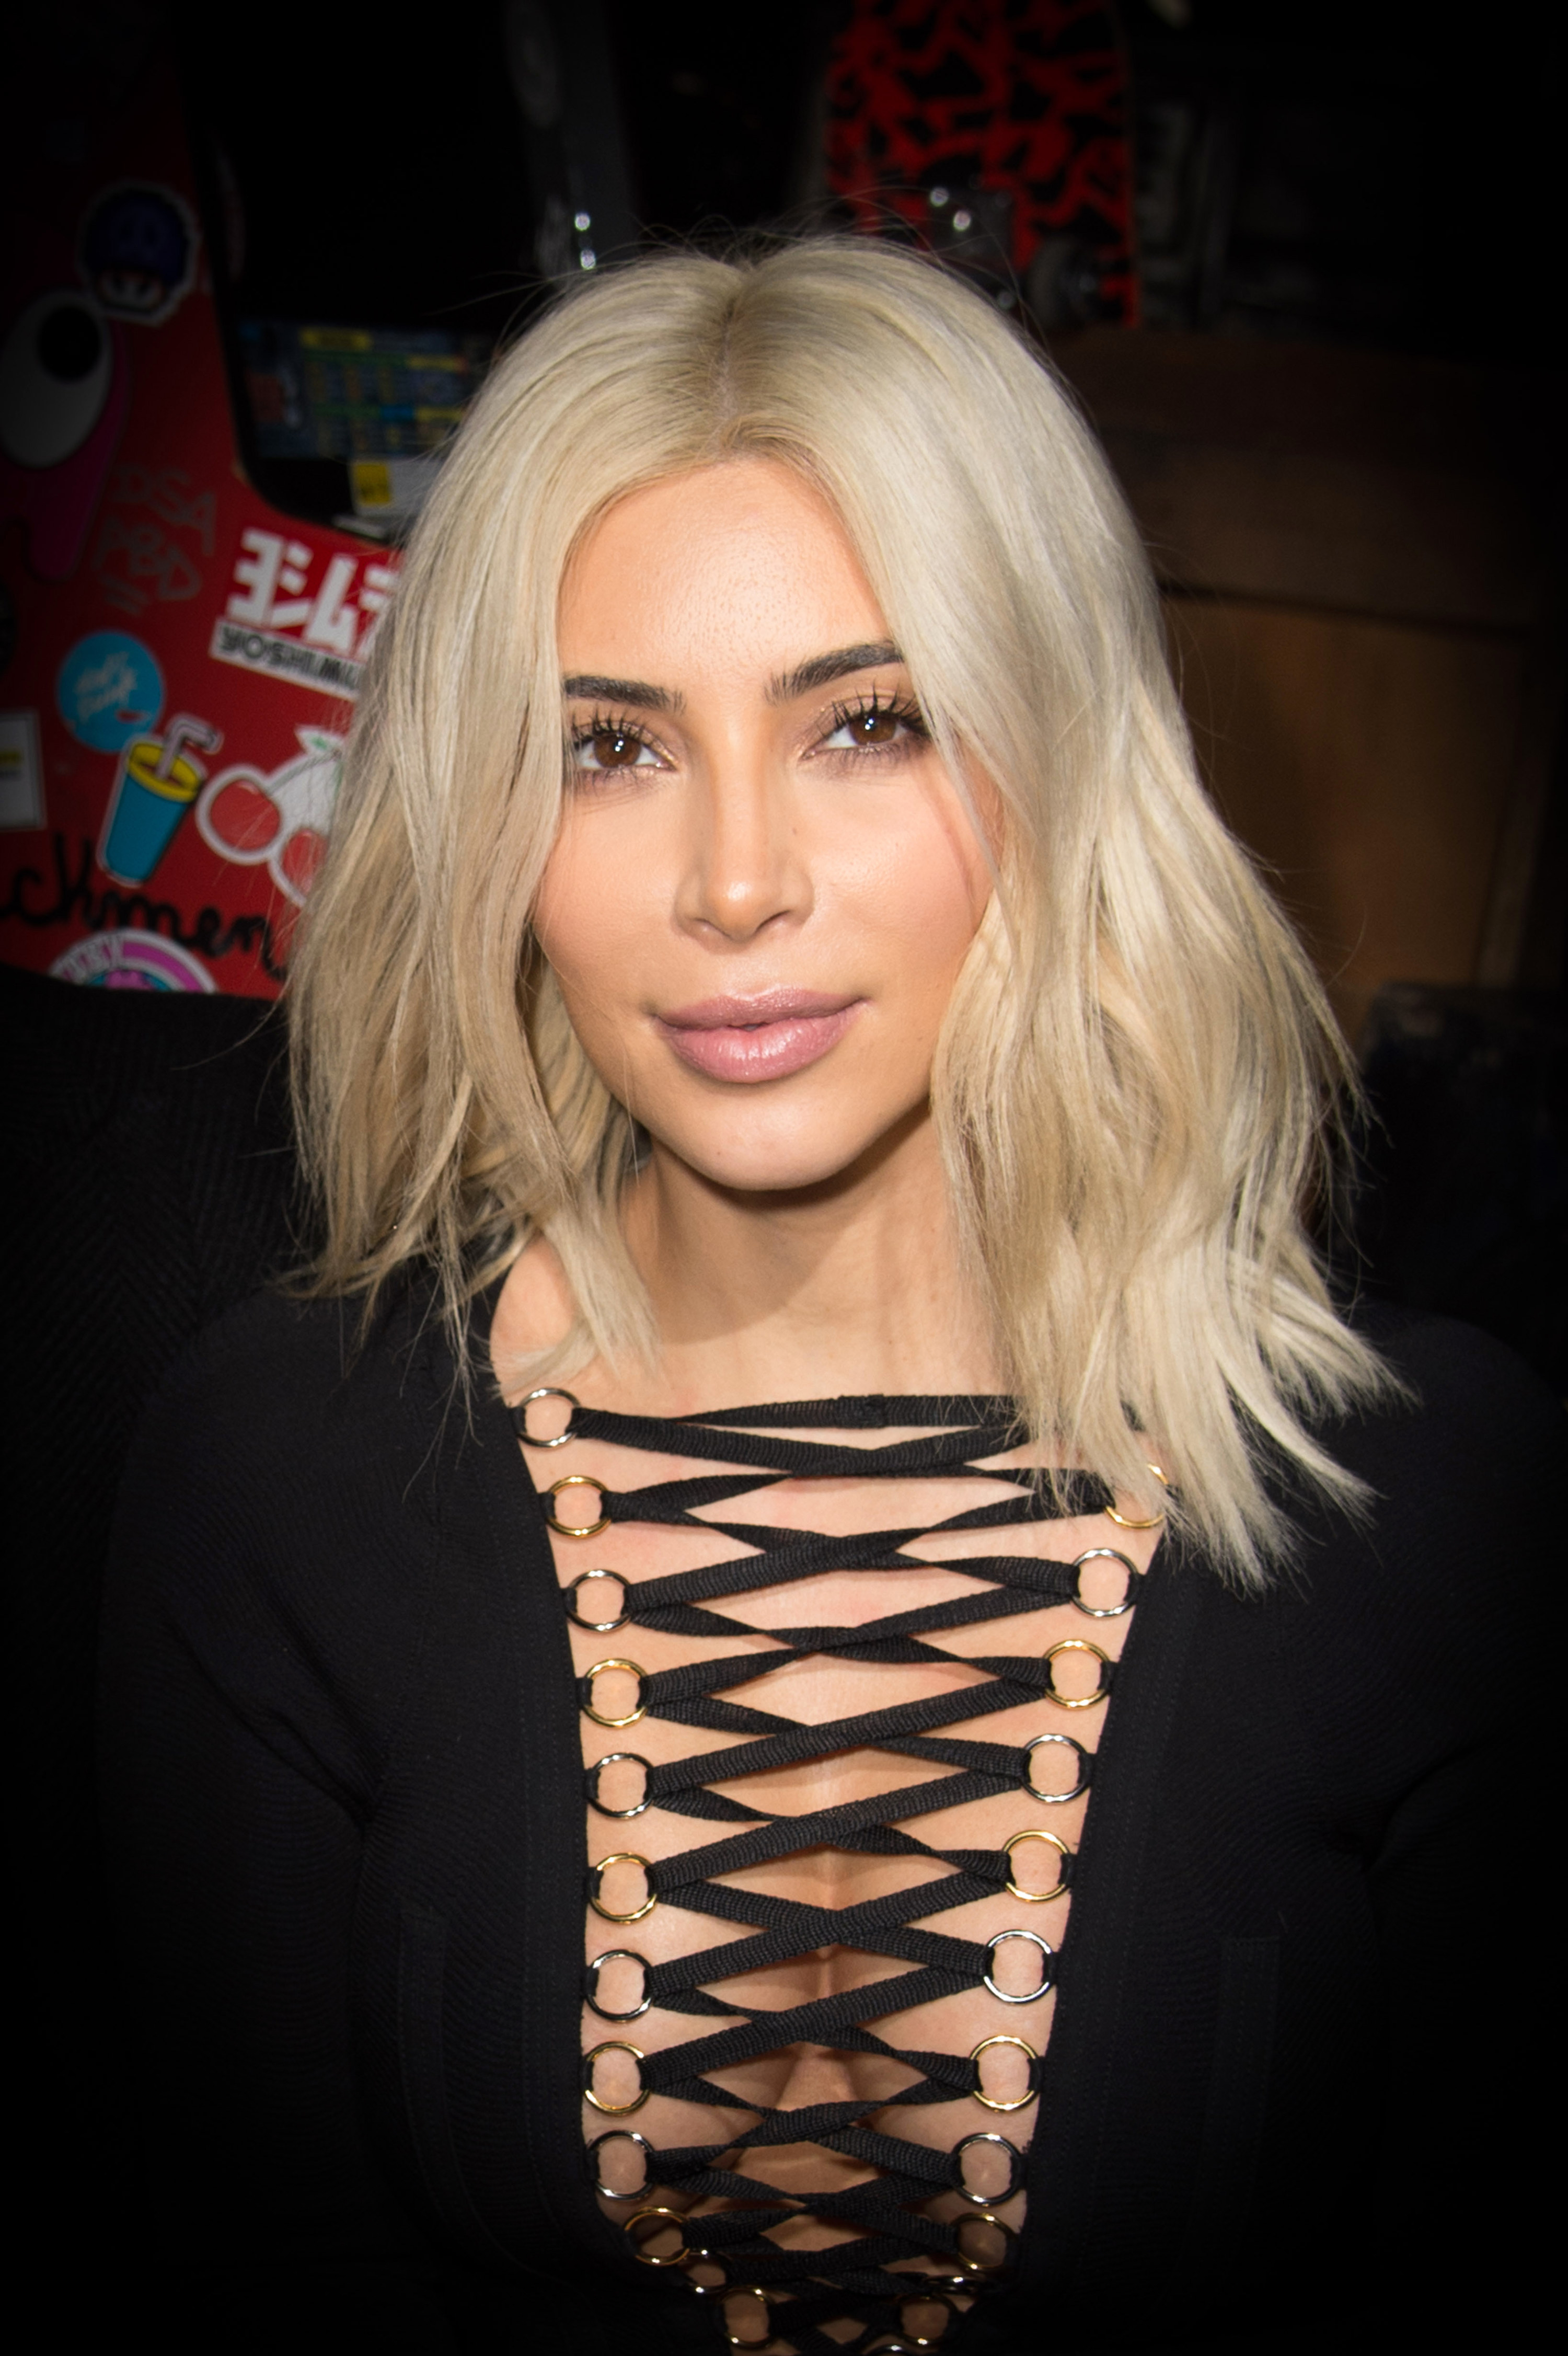 Kim Kardashian surprises fans with new hair transformation at prison reform  event - Daily Record